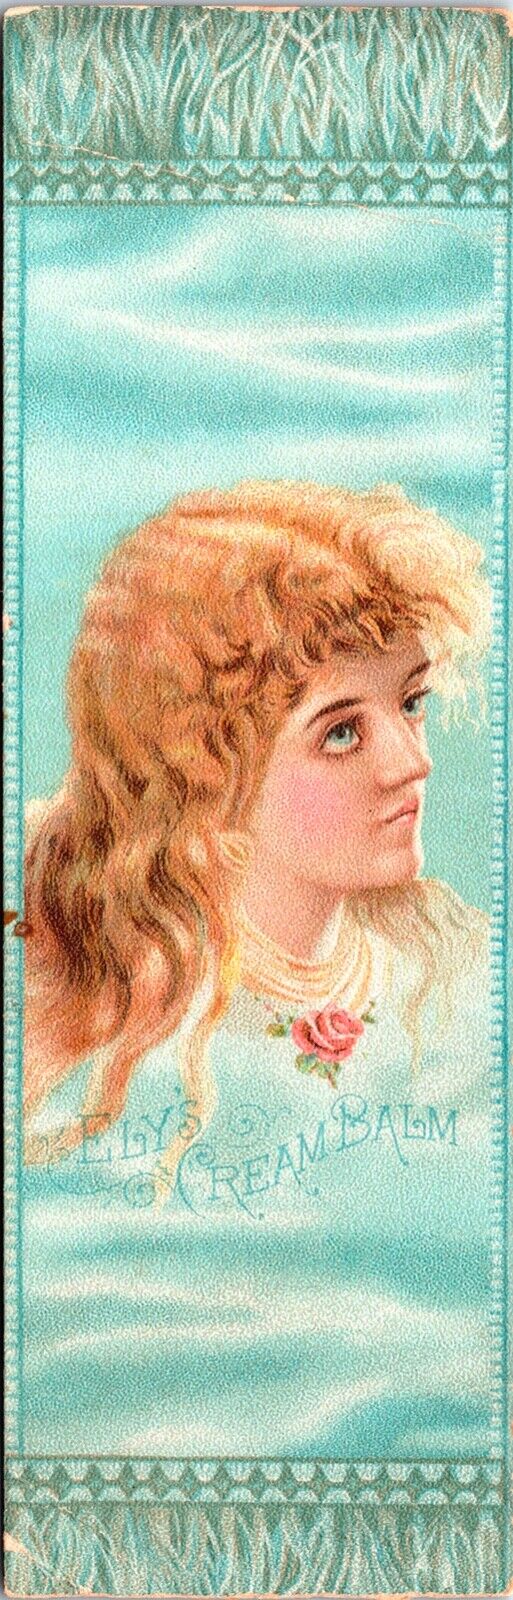 Vintage Ely\'s Cream Balm Quack Remedy Victorian Trade Card Warren St, NY